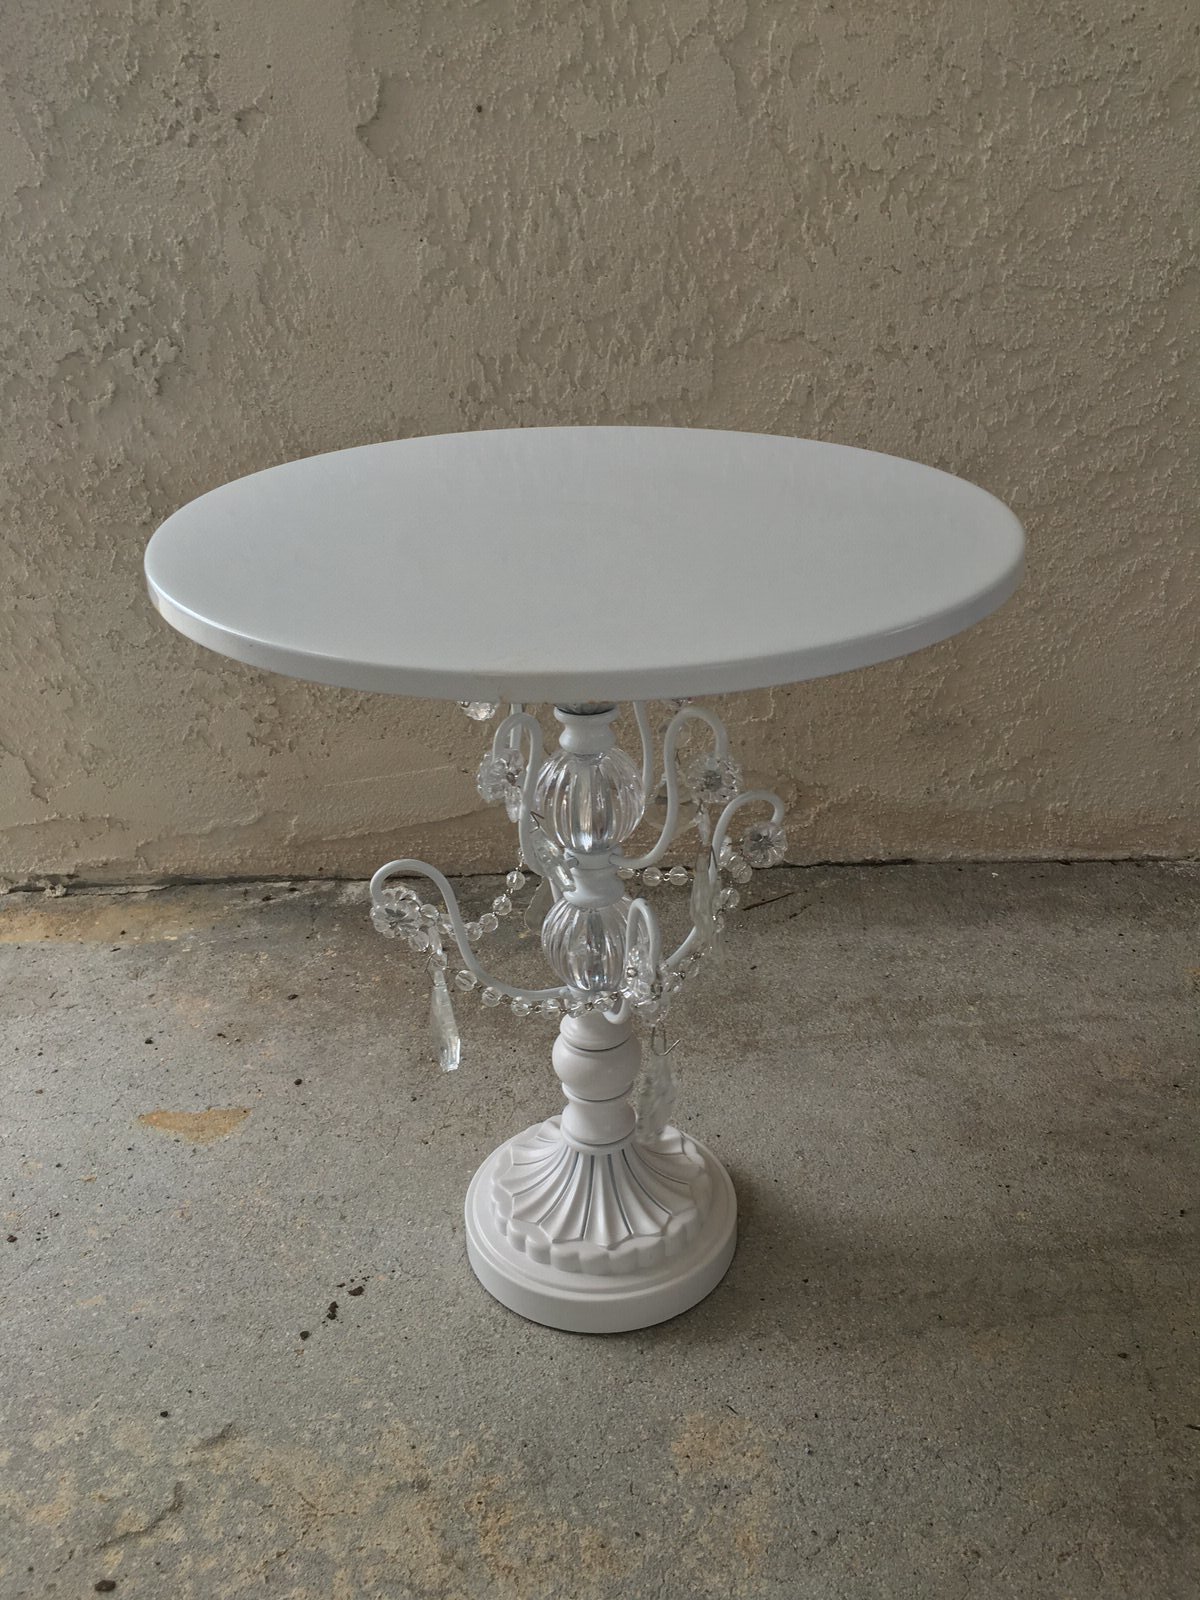  Tall MD White Cake Stand 